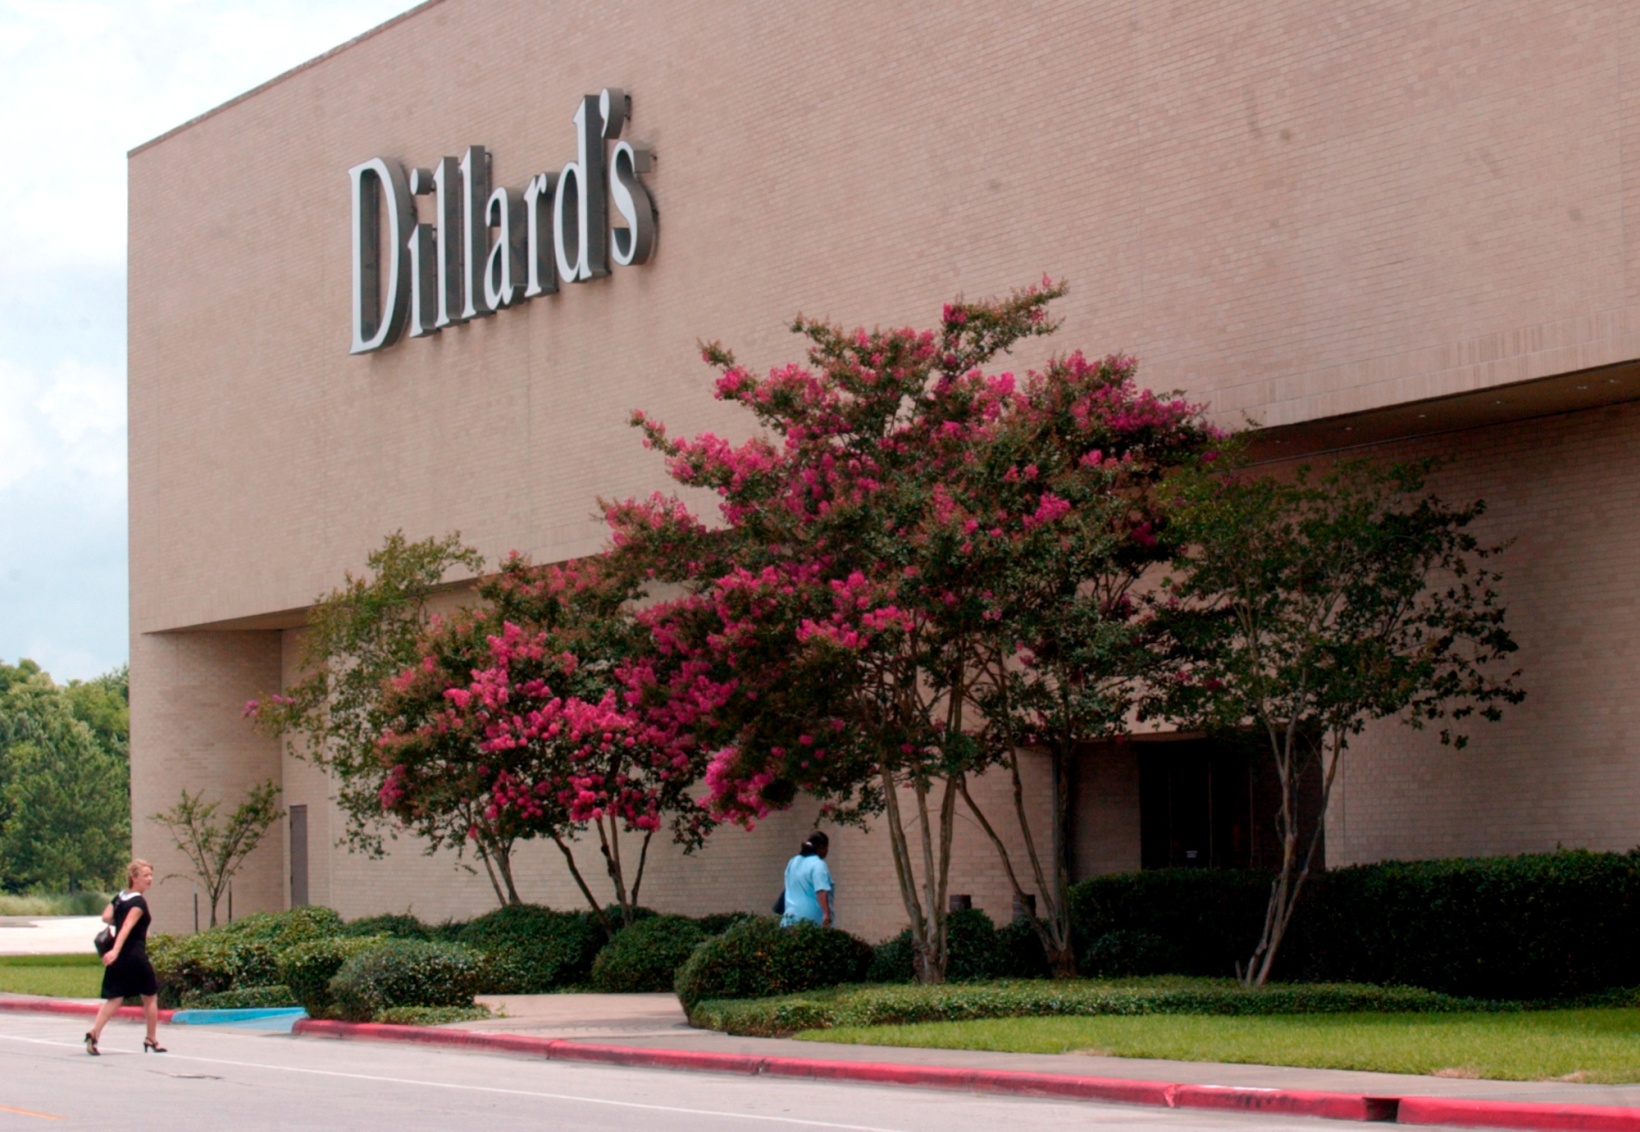 Mall of Louisiana - Today from 10am-4pm at Dillard's Vintage